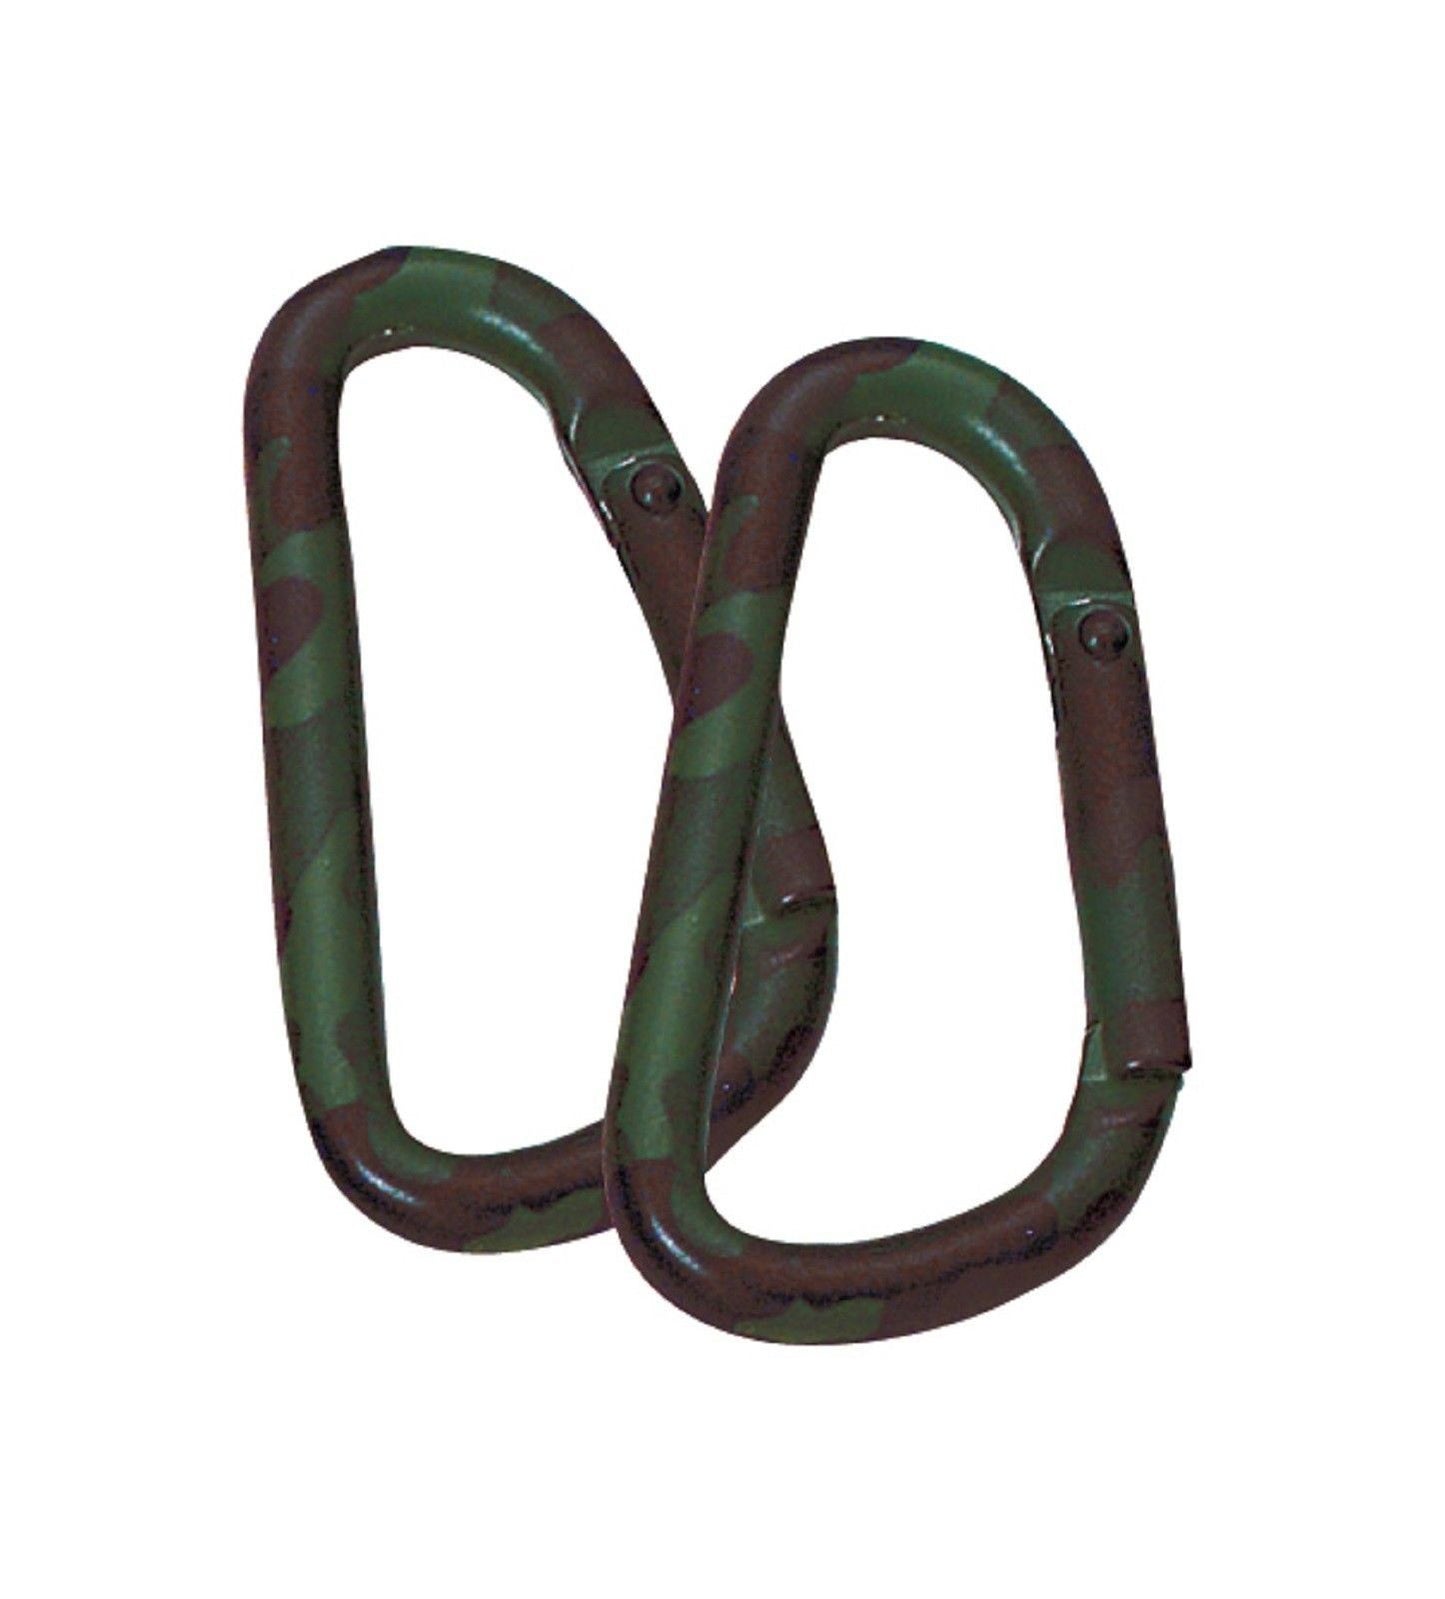 Woodland Camouflage Carabiner 2 Per Card - 60 MM - Not For Climbing